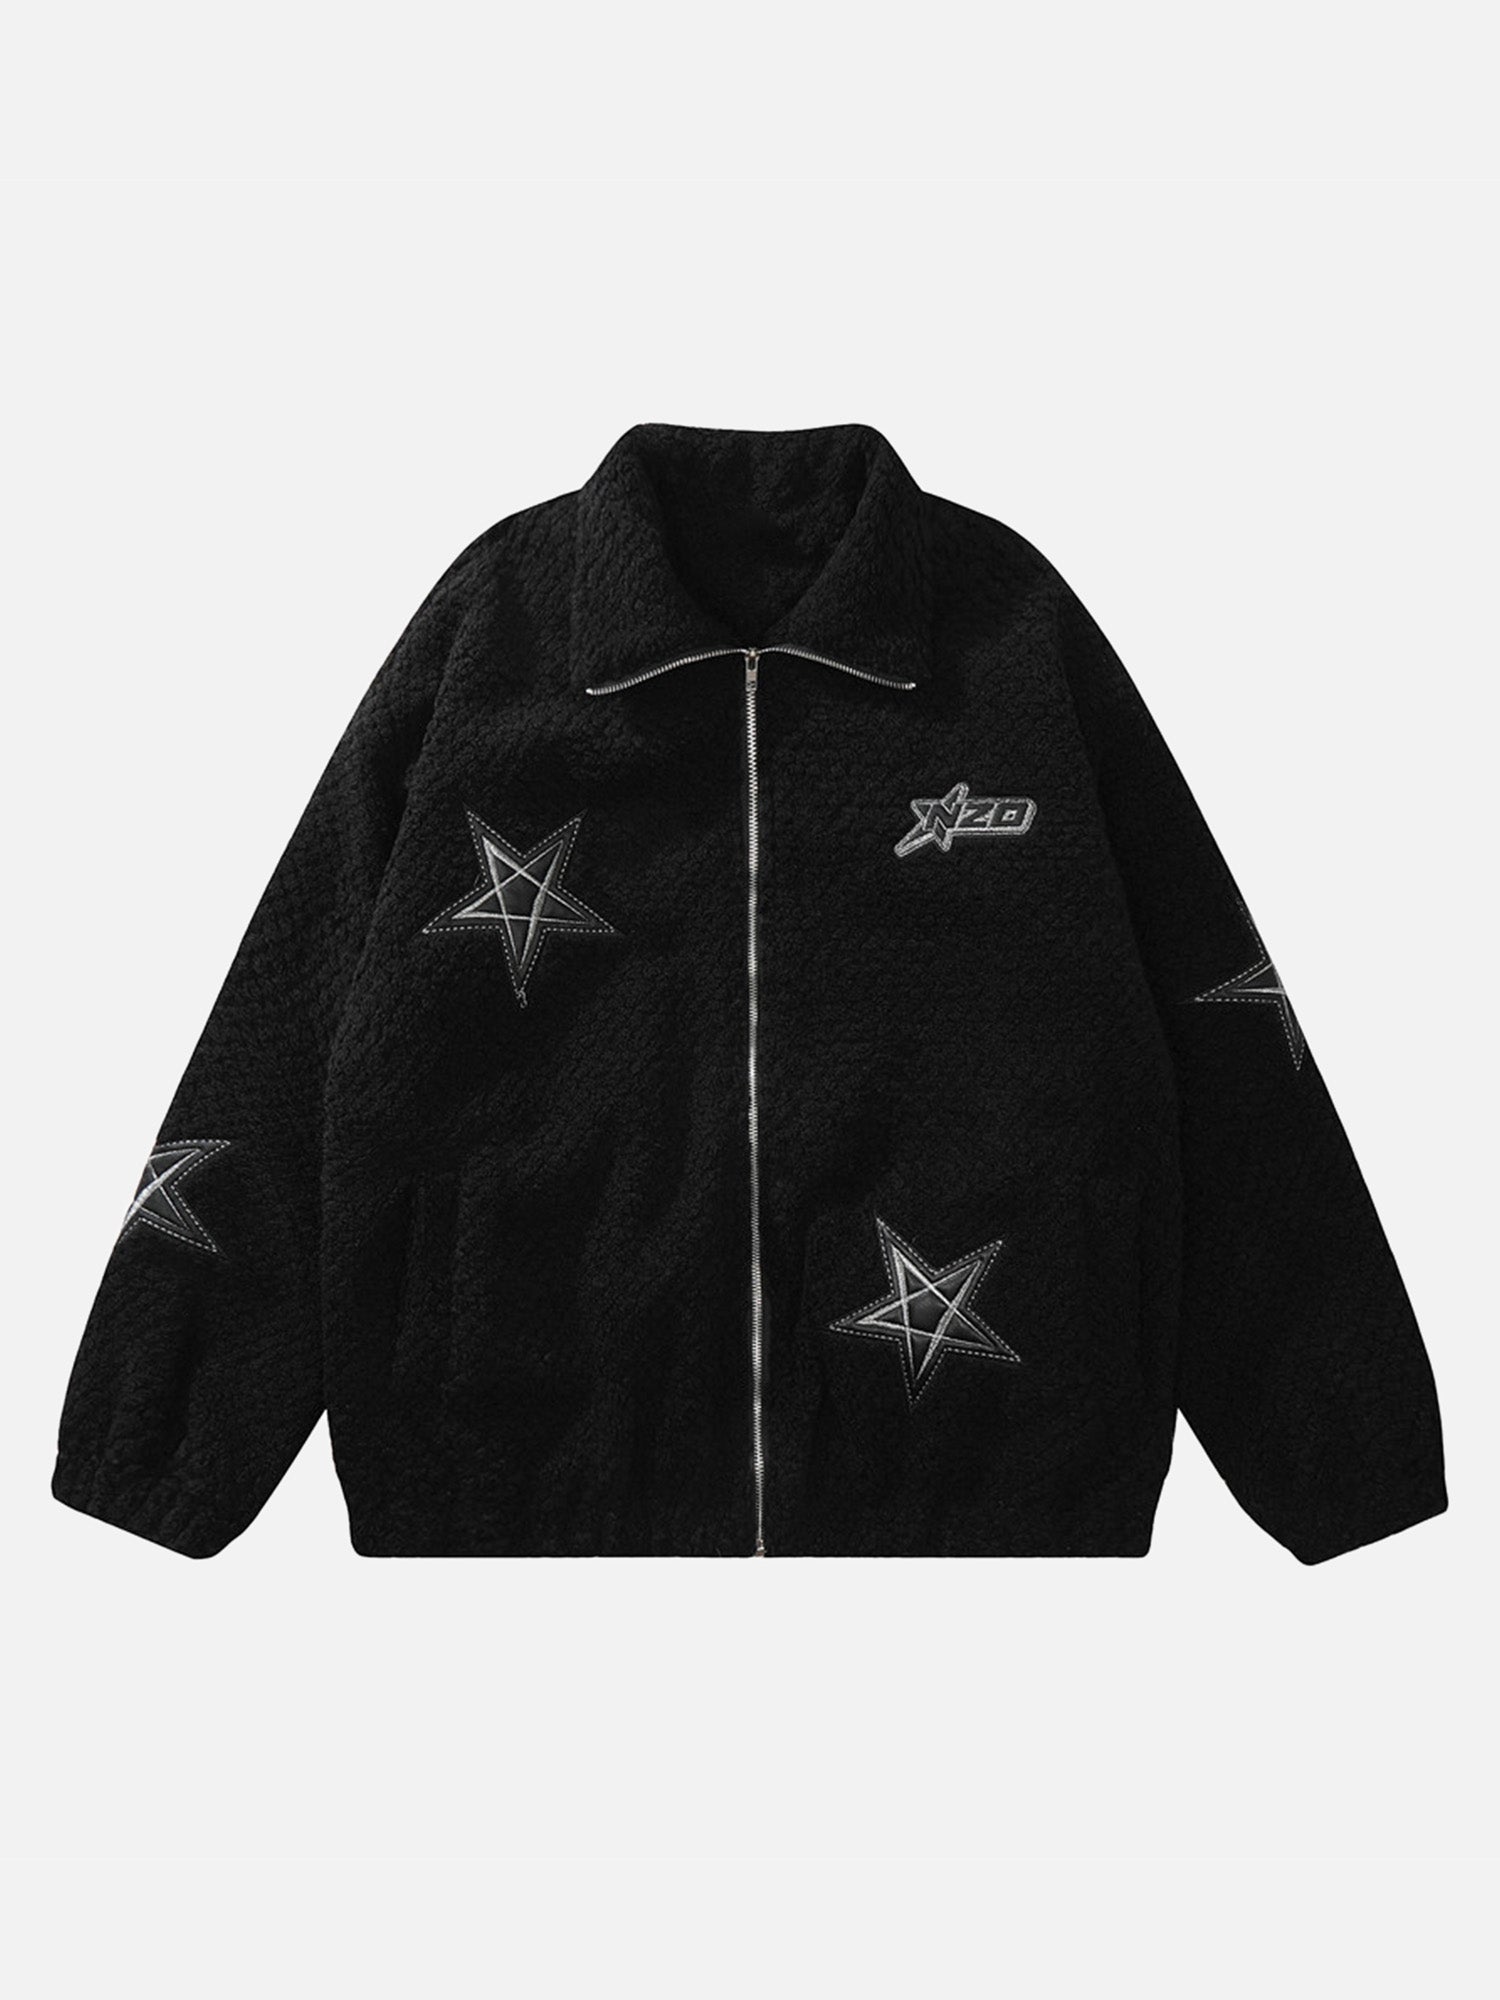 Thesupermade Embroidered Five-pointed Star Design Lambswool Cotton Jacket